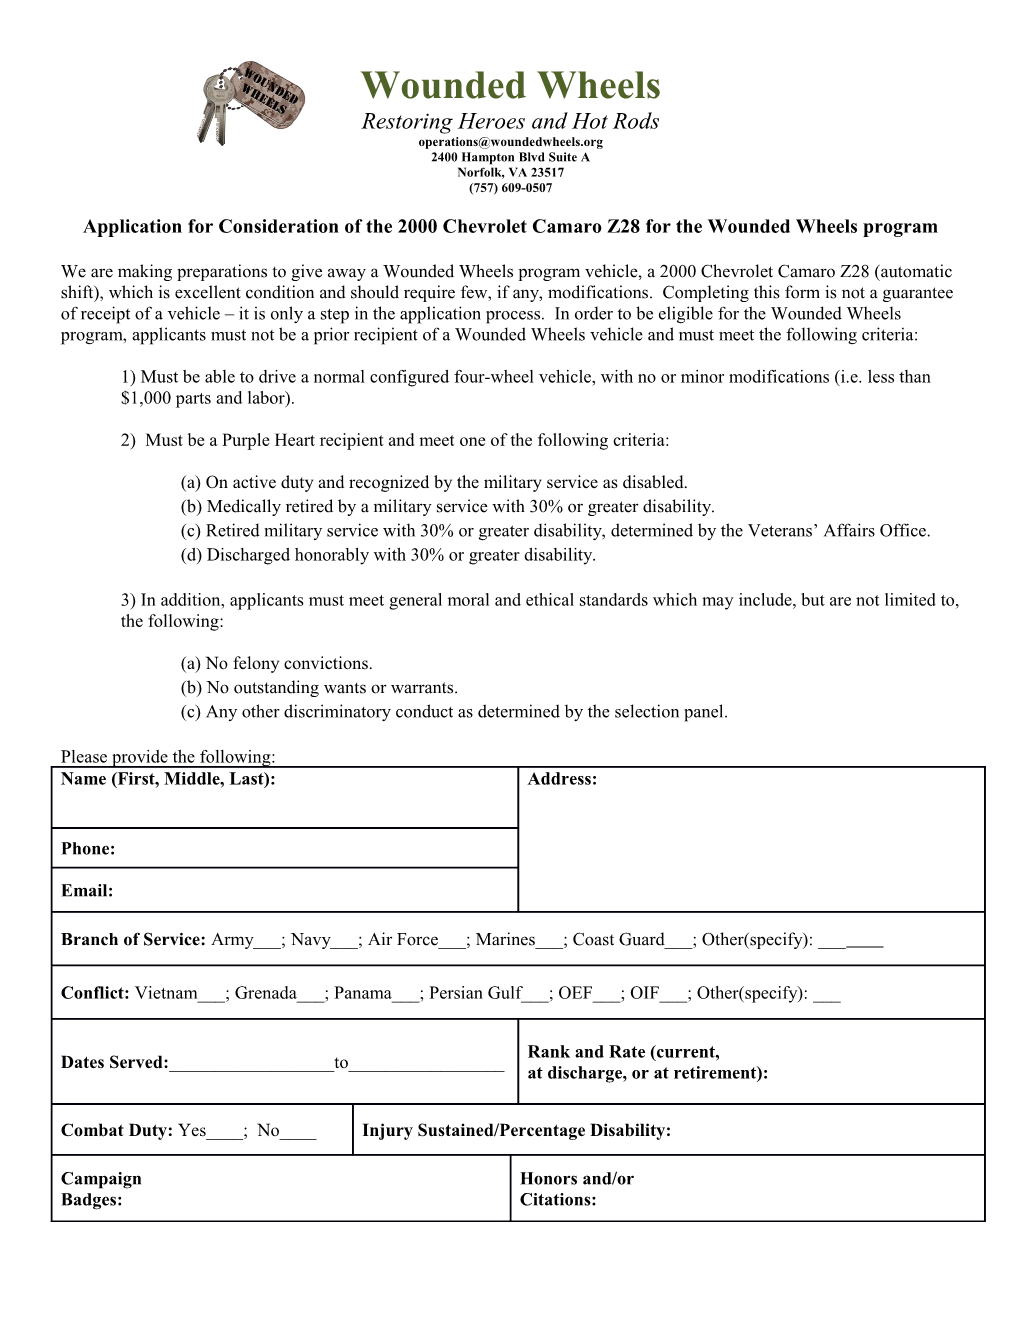 Application for Consideration of The2000 Chevrolet Camaro Z28 for the Wounded Wheels Program